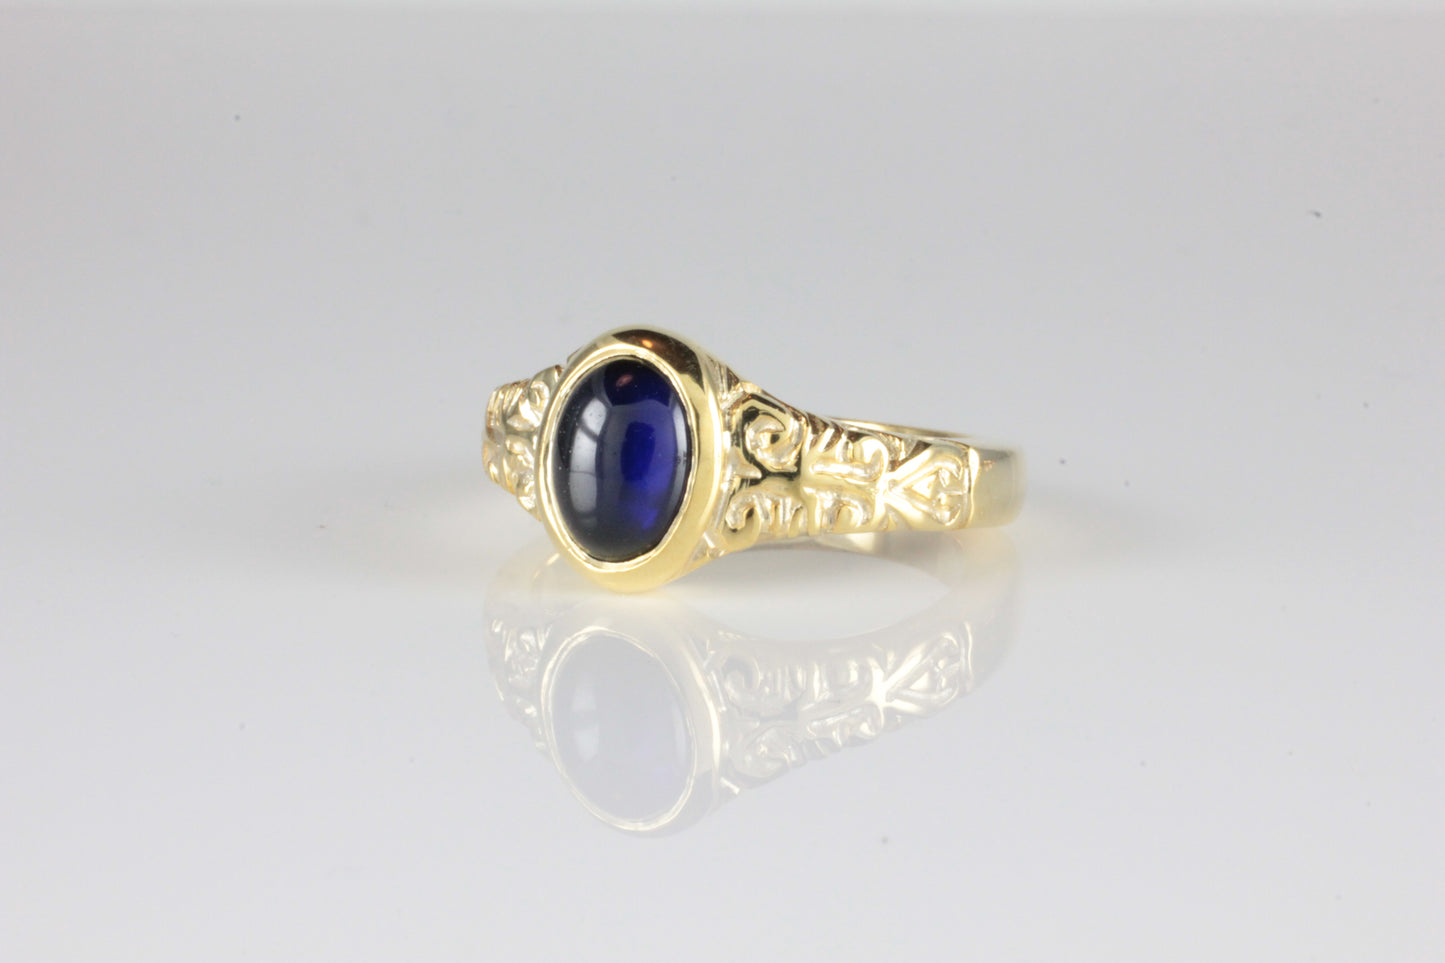 'Sostra' Victorian style Oval Sapphire Cabochon Ring